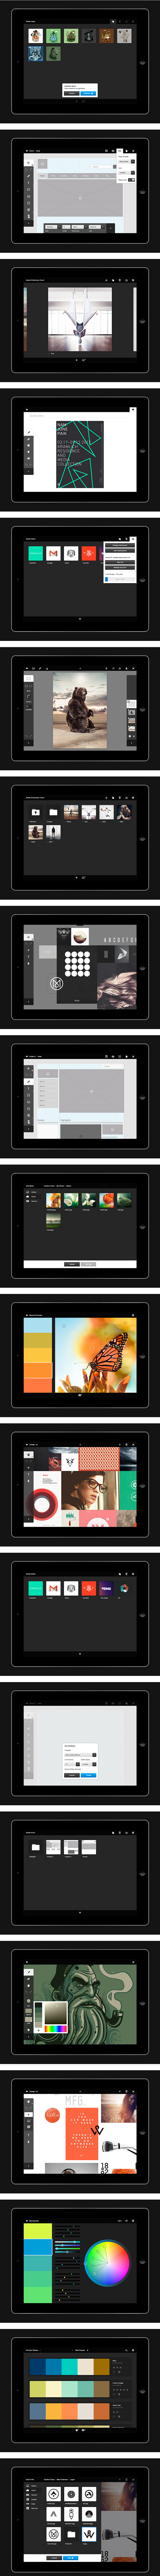 Adobe touch apps - 3...